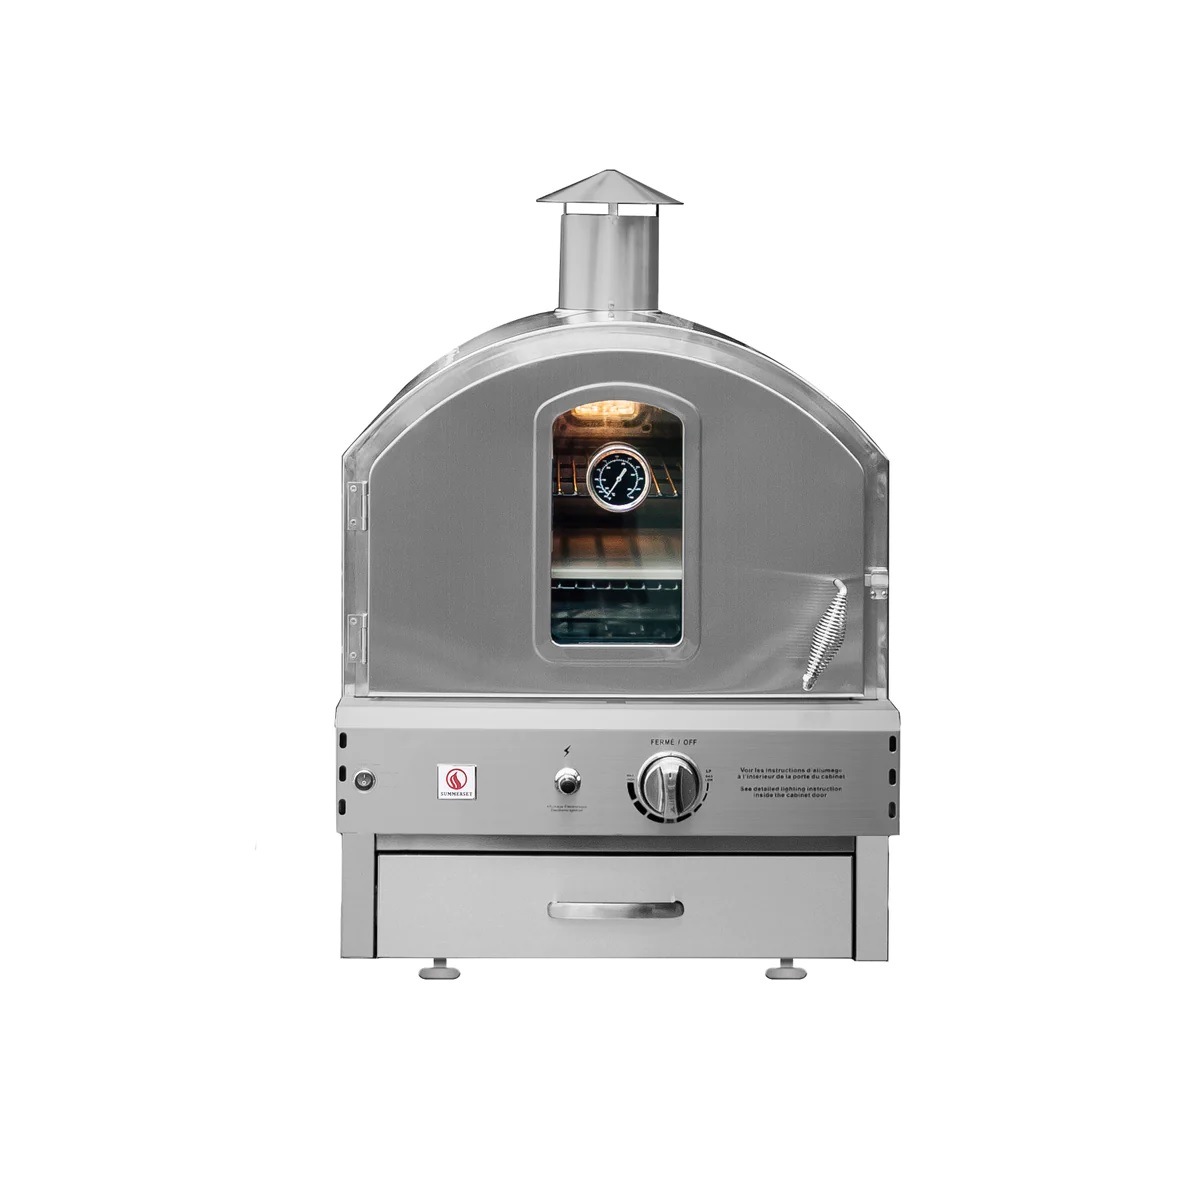 built-in gas oven product image